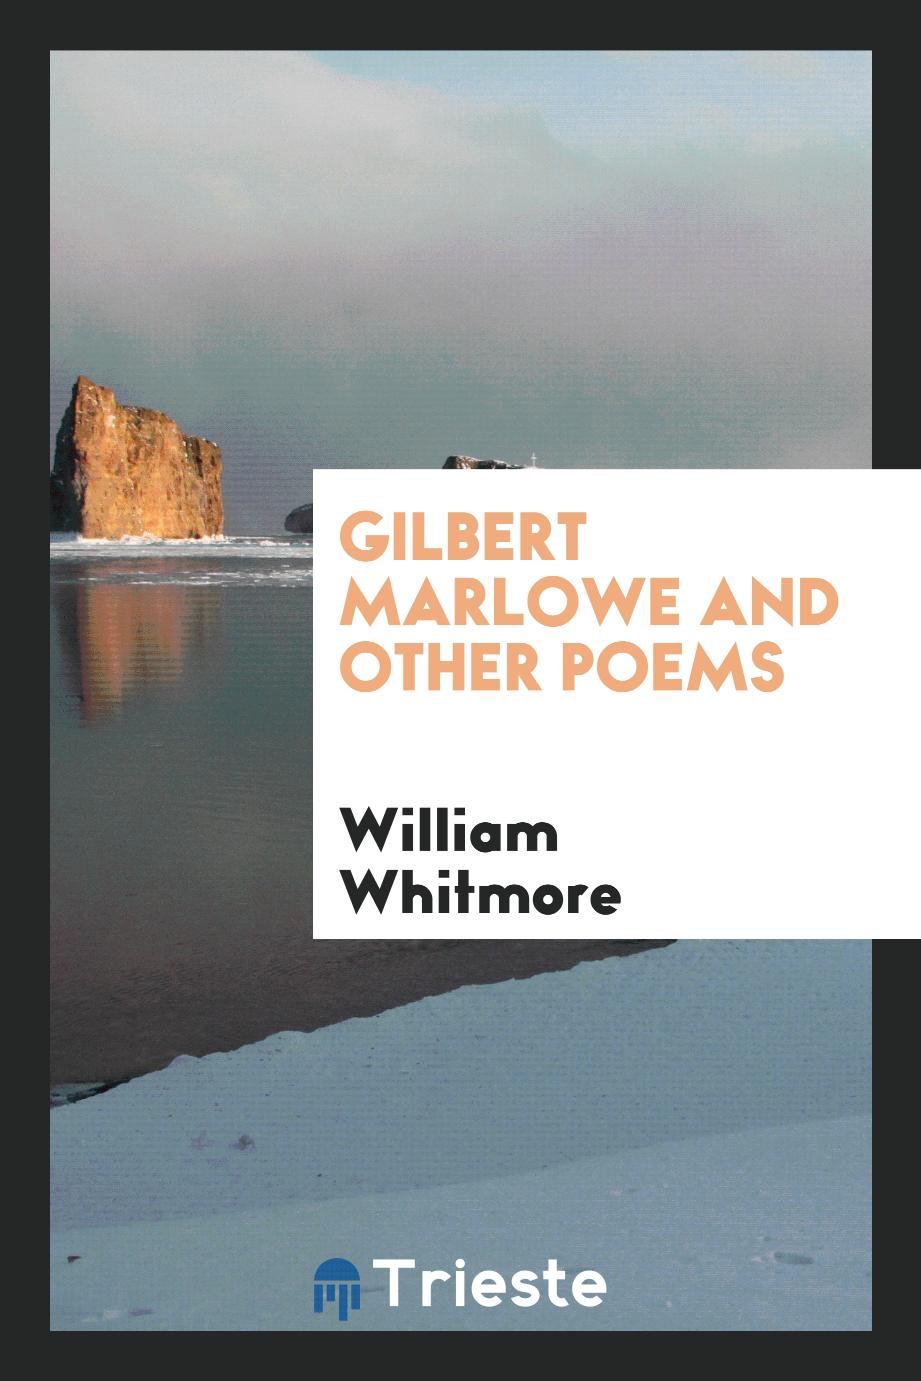 Gilbert Marlowe and Other Poems